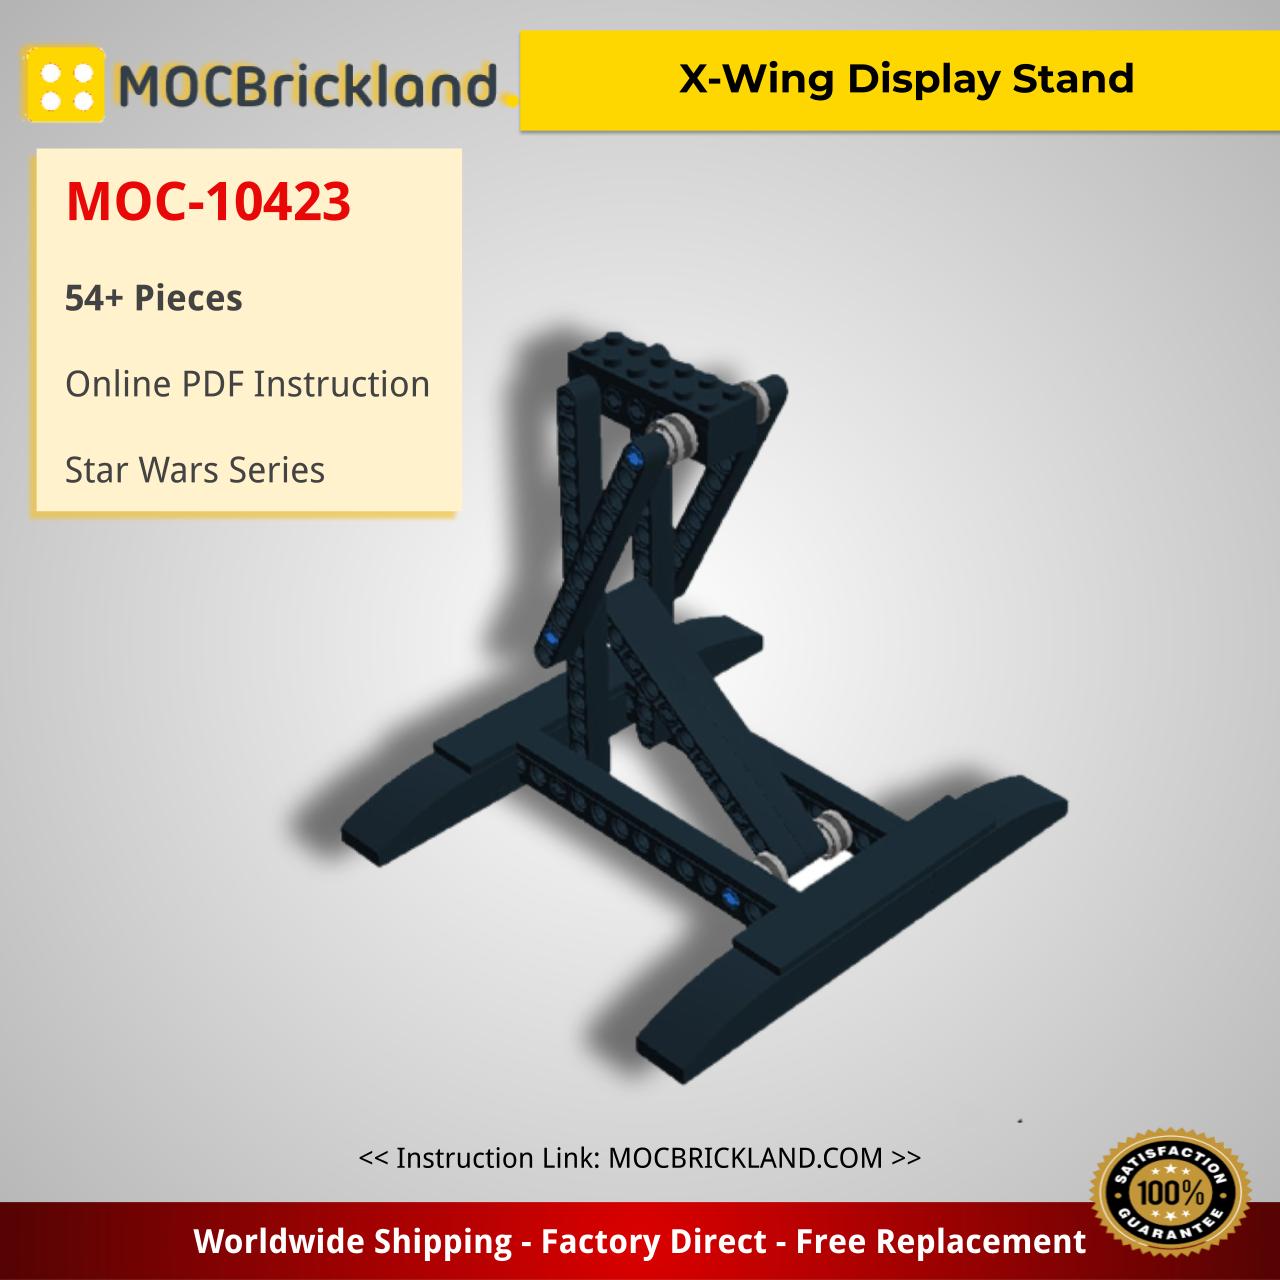 MOCBRICKLAND MOC-10423 X-Wing Display Stand